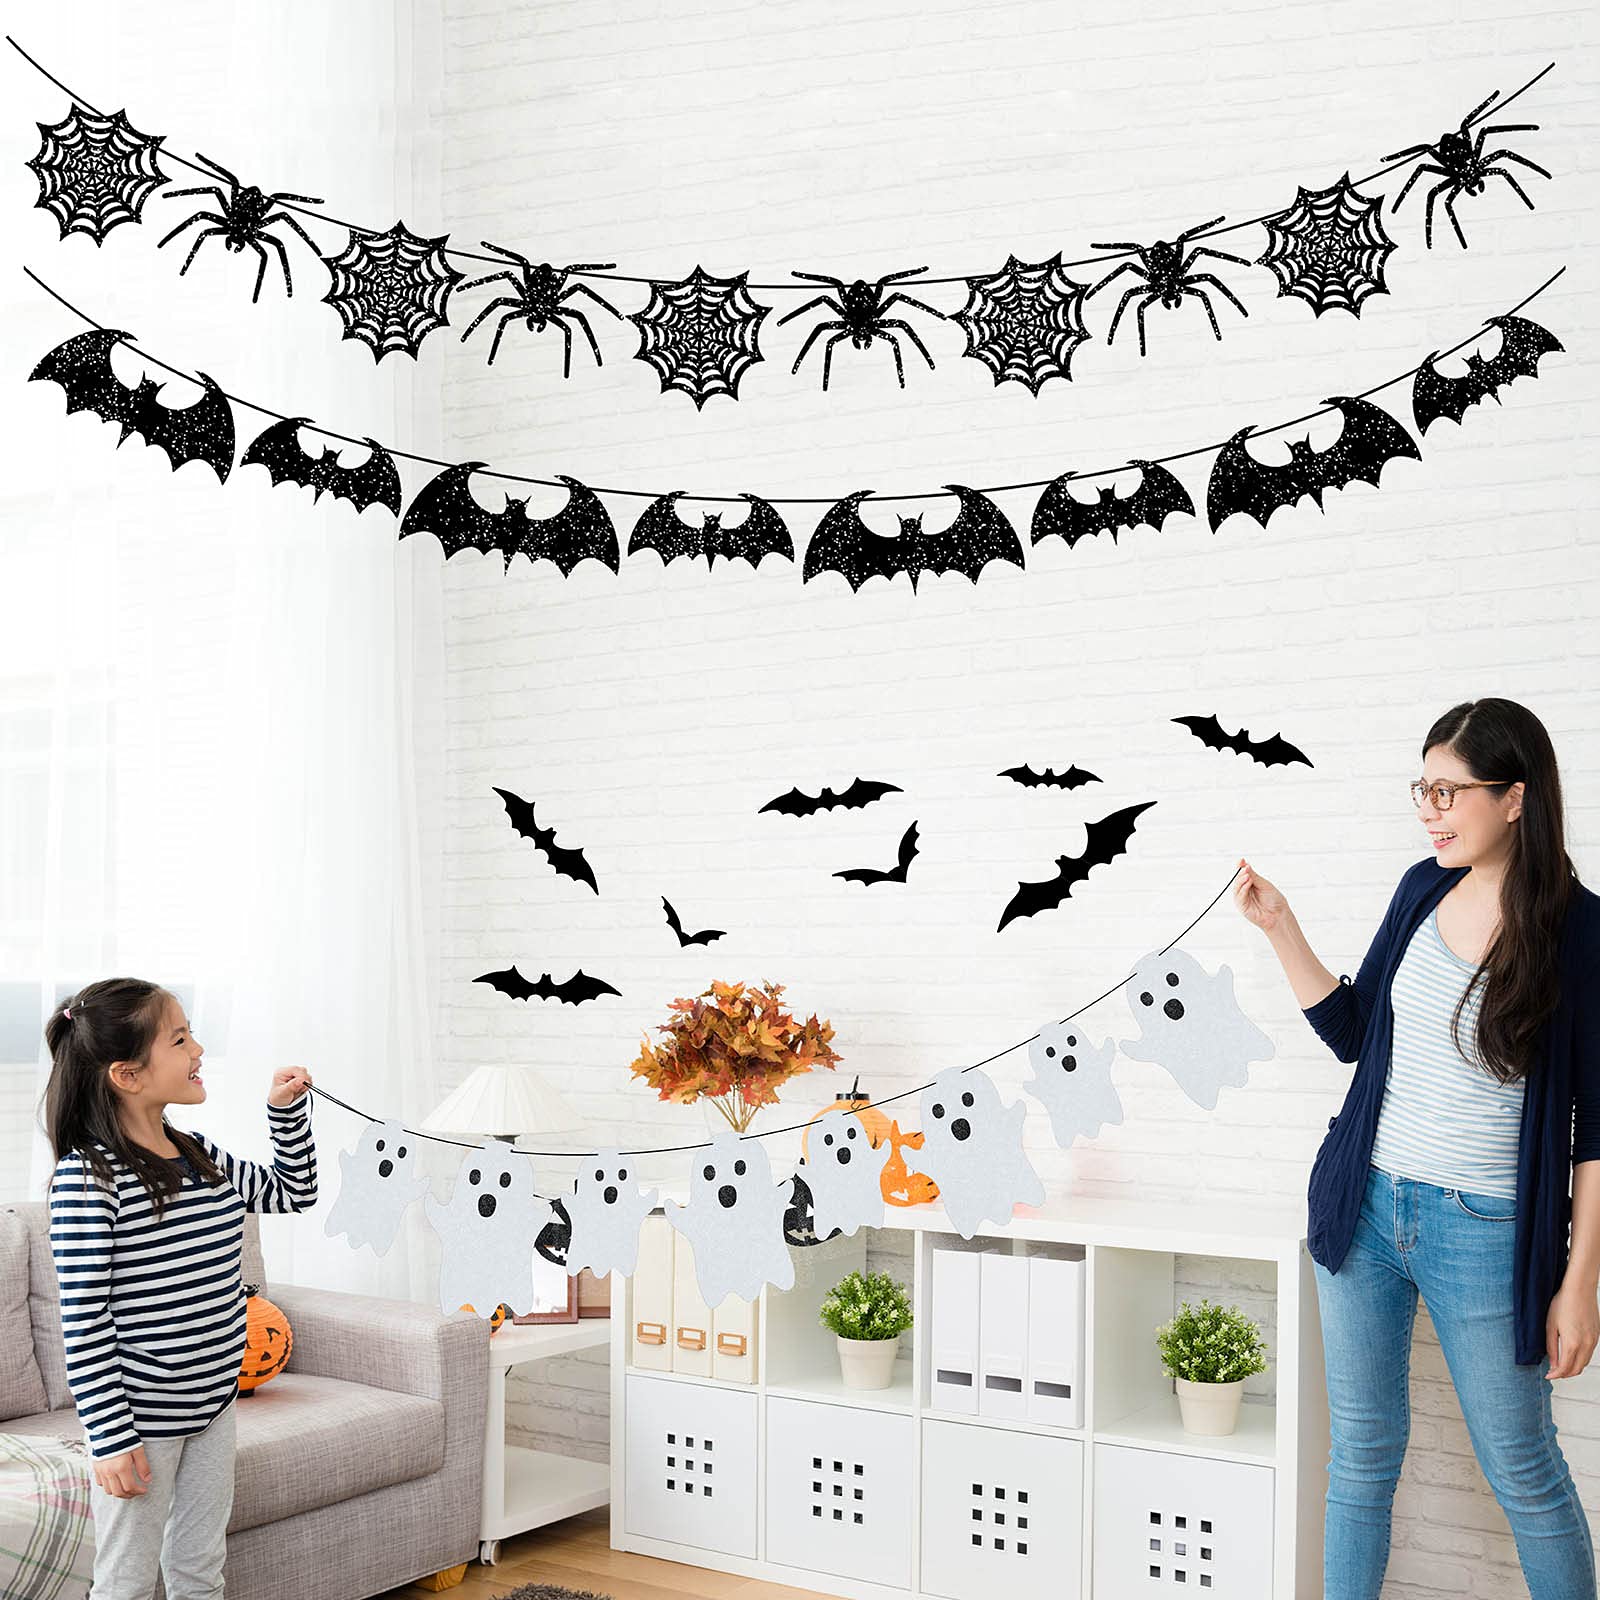 39 Pieces Halloween Decorations Black Glittery Bat Banner Spider Ghost Garland 3D Bat Wall Stickers Hanging Bat Banner for Halloween Party Haunted House Decoration Indoor Outdoor Mantel Supplies